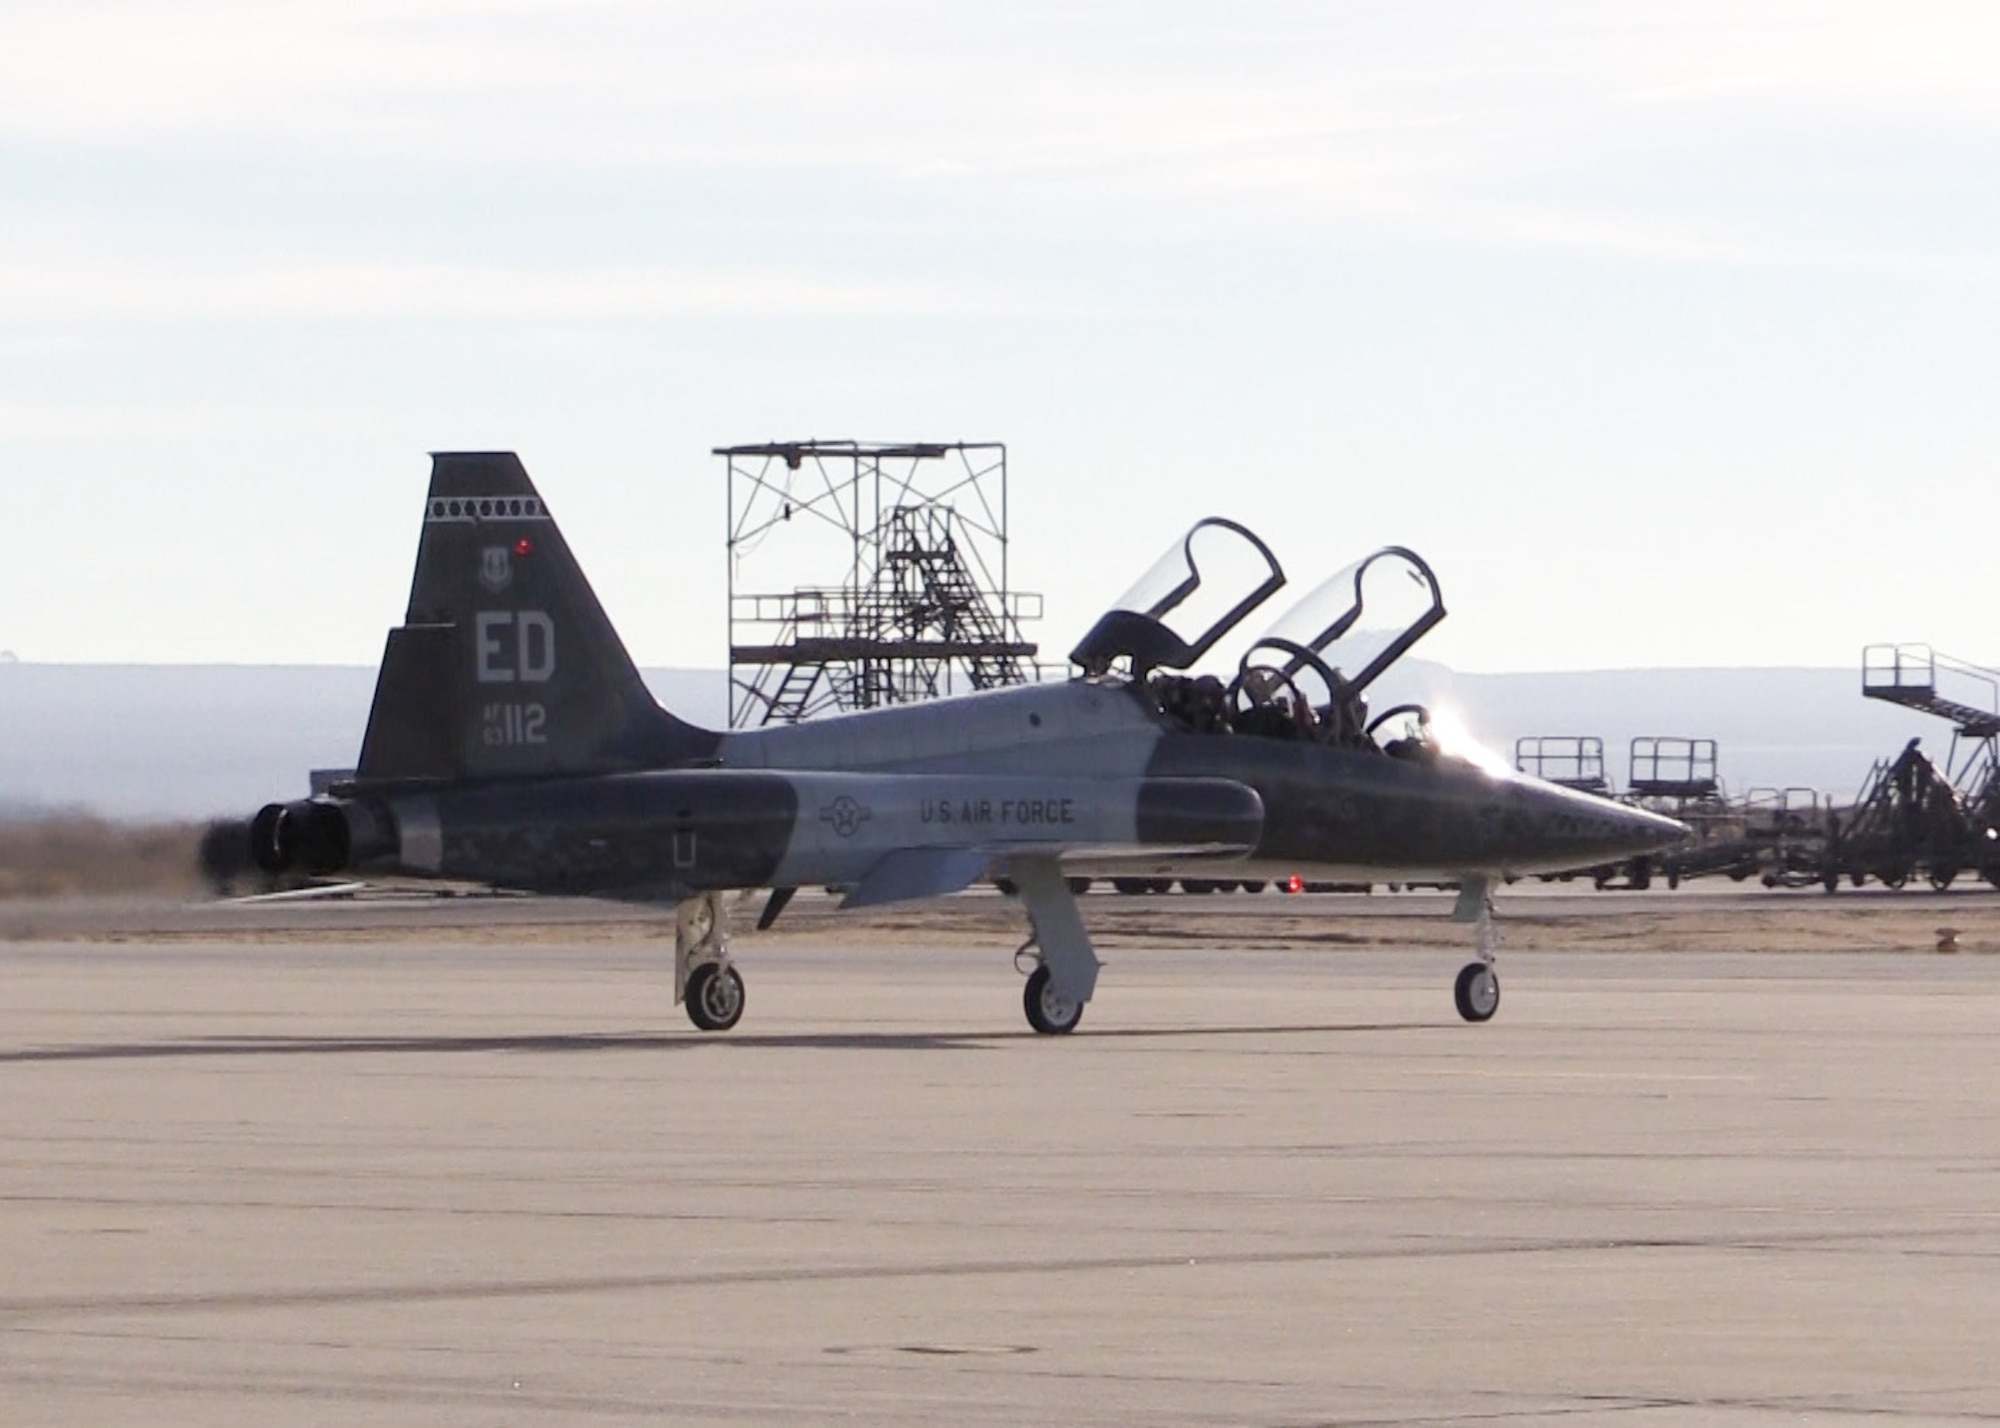 A T-38 Talon assigned to the U.S. Air Force Test Pilot School taxis at Edwards Air Force Base, California. (U.S. Air Force photo by Dawn Waldman)